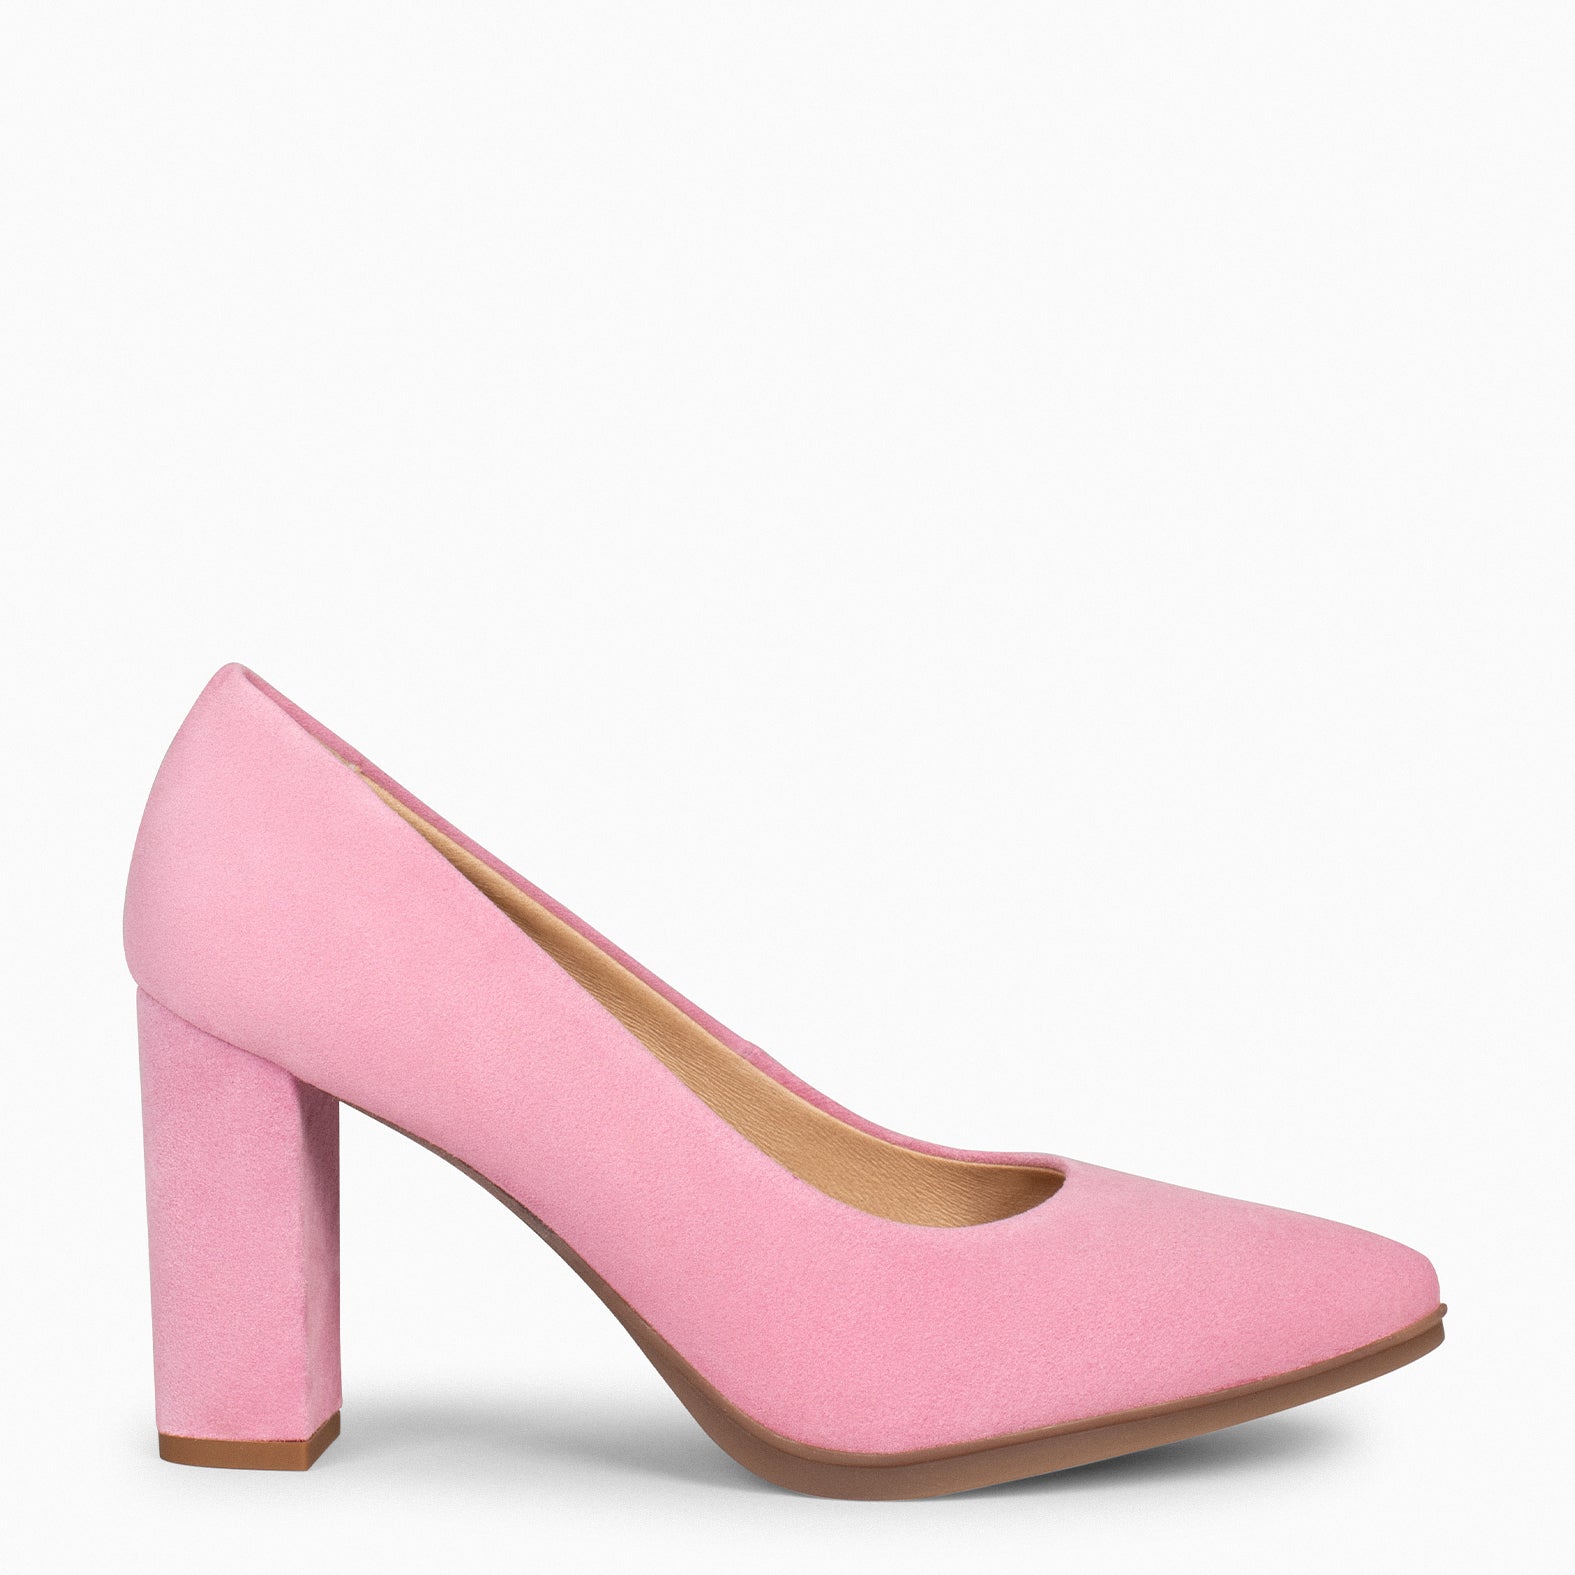 URBAN – PALE PINK Suede high-heeled shoes 